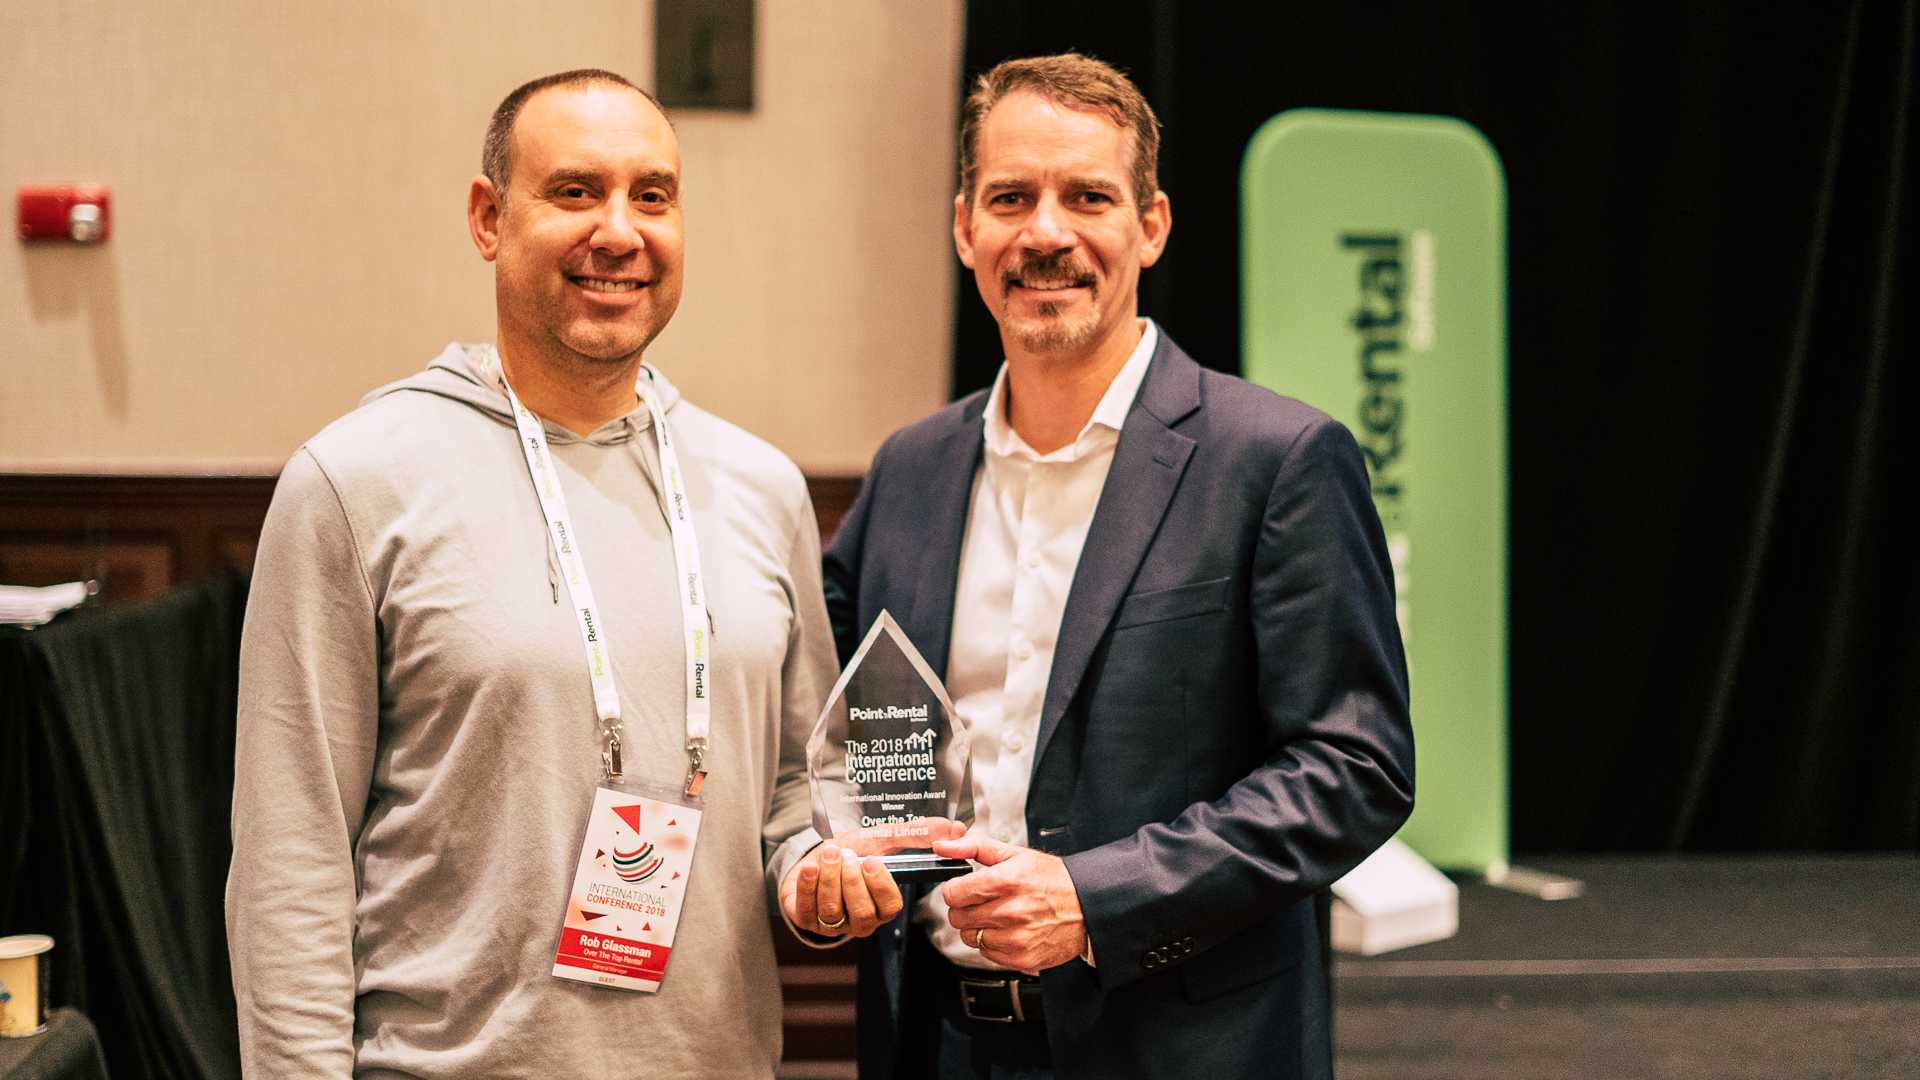 Rob Glassman, General Manager of Over the Top Rental Linens, received the International Innovation Award on Wednesday, Nov. 7.